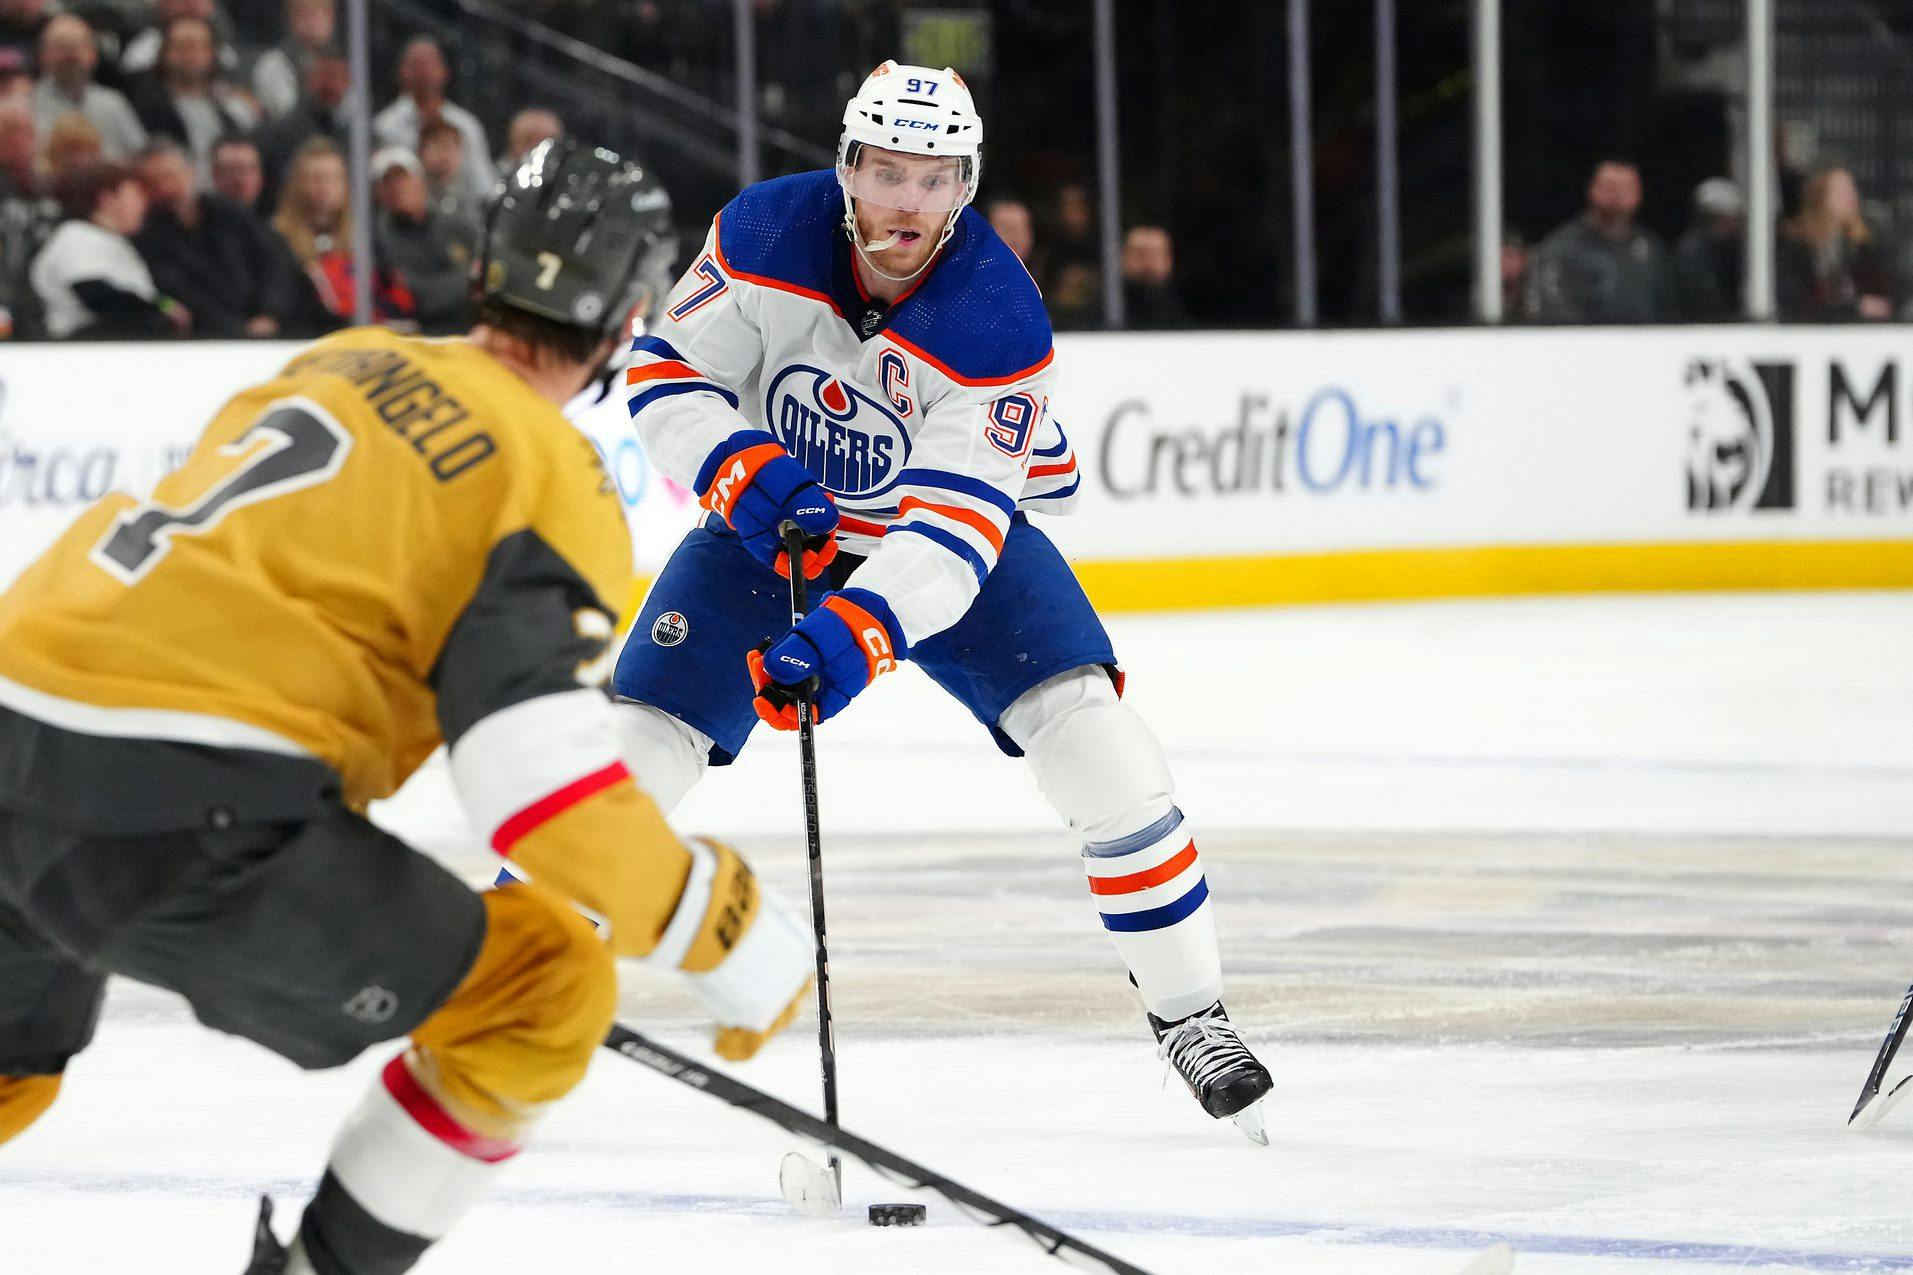 Edmonton Oilers winning streak ends at 16 with 3-1 loss to the Golden Knights